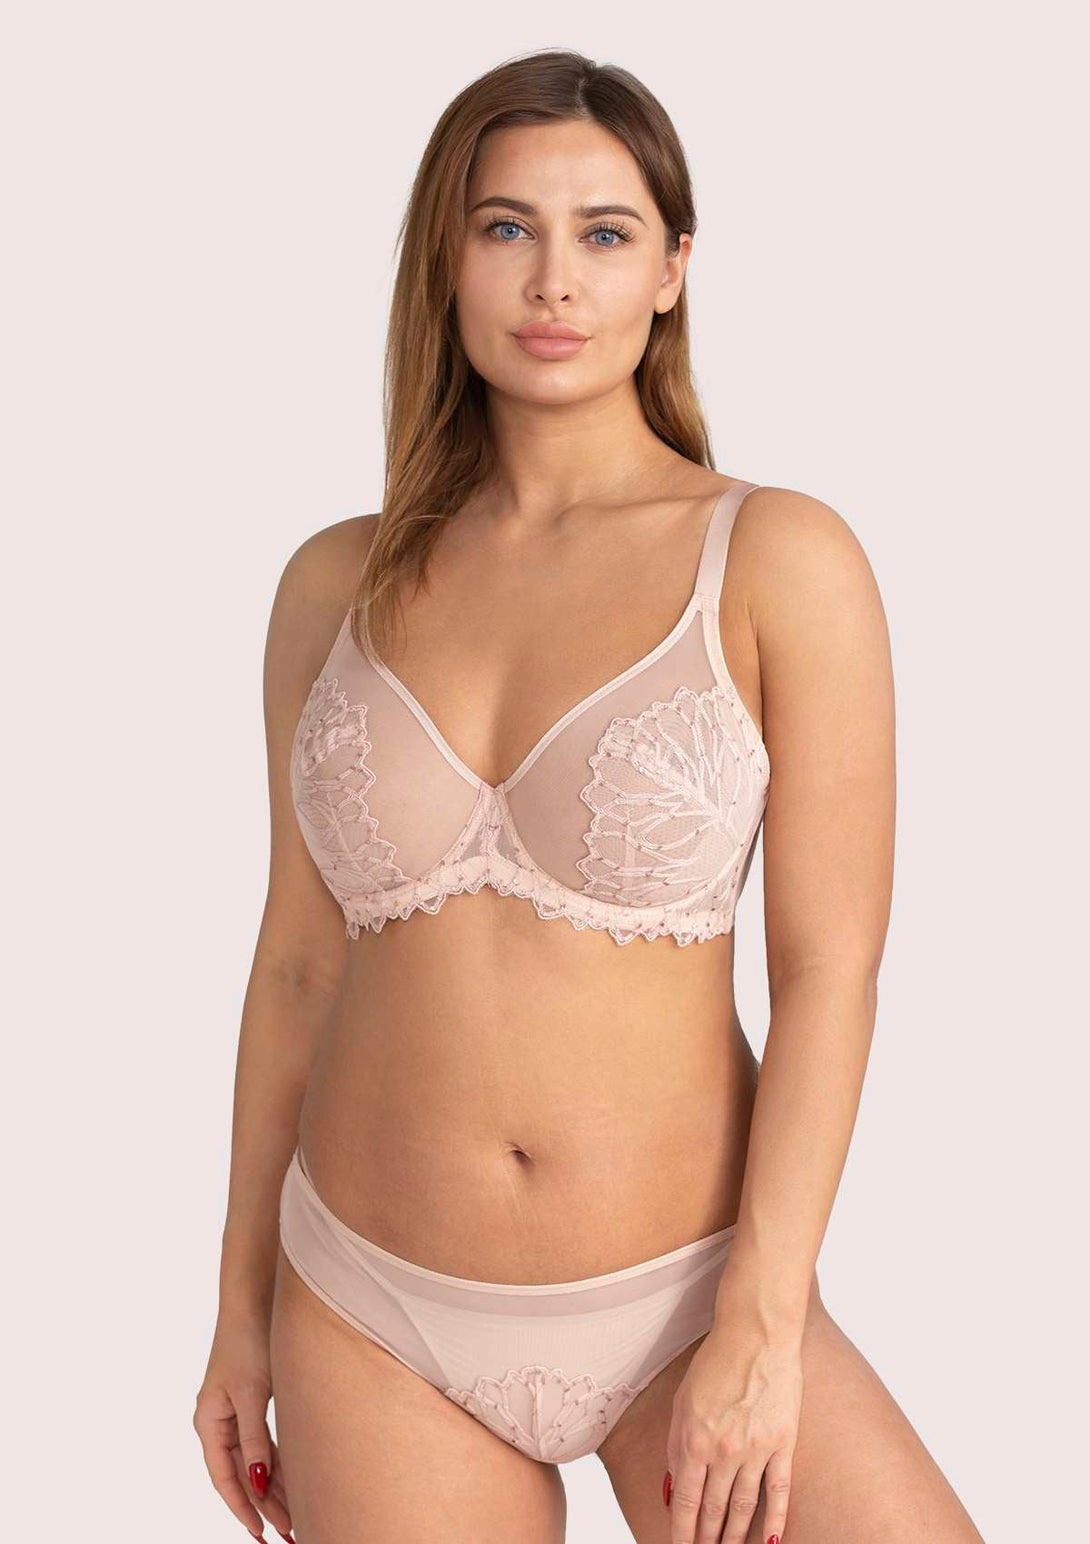 HSIA HSIA Delicate Unlined Lace Bra Light Pink / 32 / C